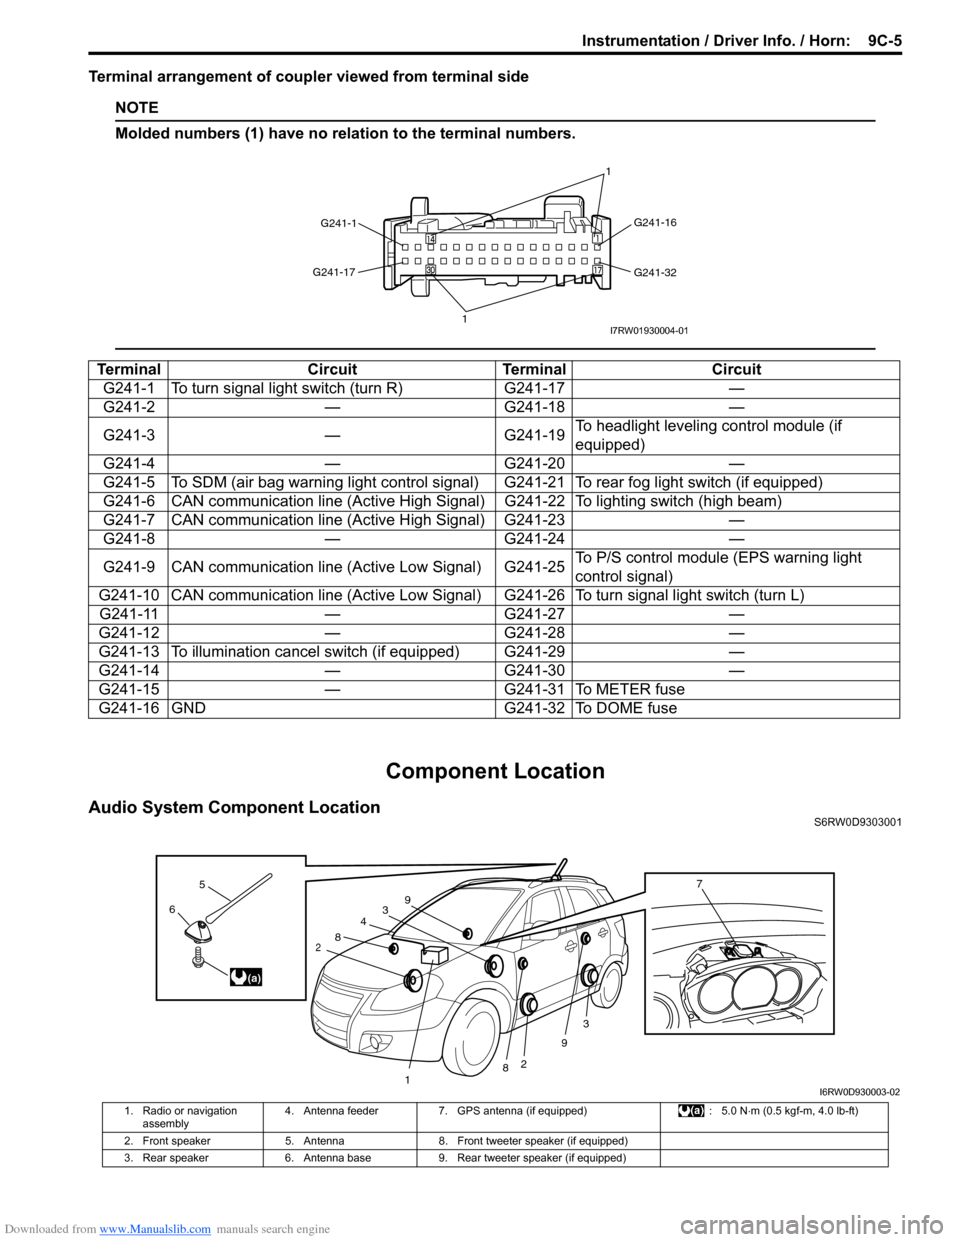 SUZUKI SX4 2006 1.G Service Workshop Manual Downloaded from www.Manualslib.com manuals search engine Instrumentation / Driver Info. / Horn:  9C-5
Terminal arrangement of coupler viewed from terminal side
NOTE
Molded numbers (1) have no relation